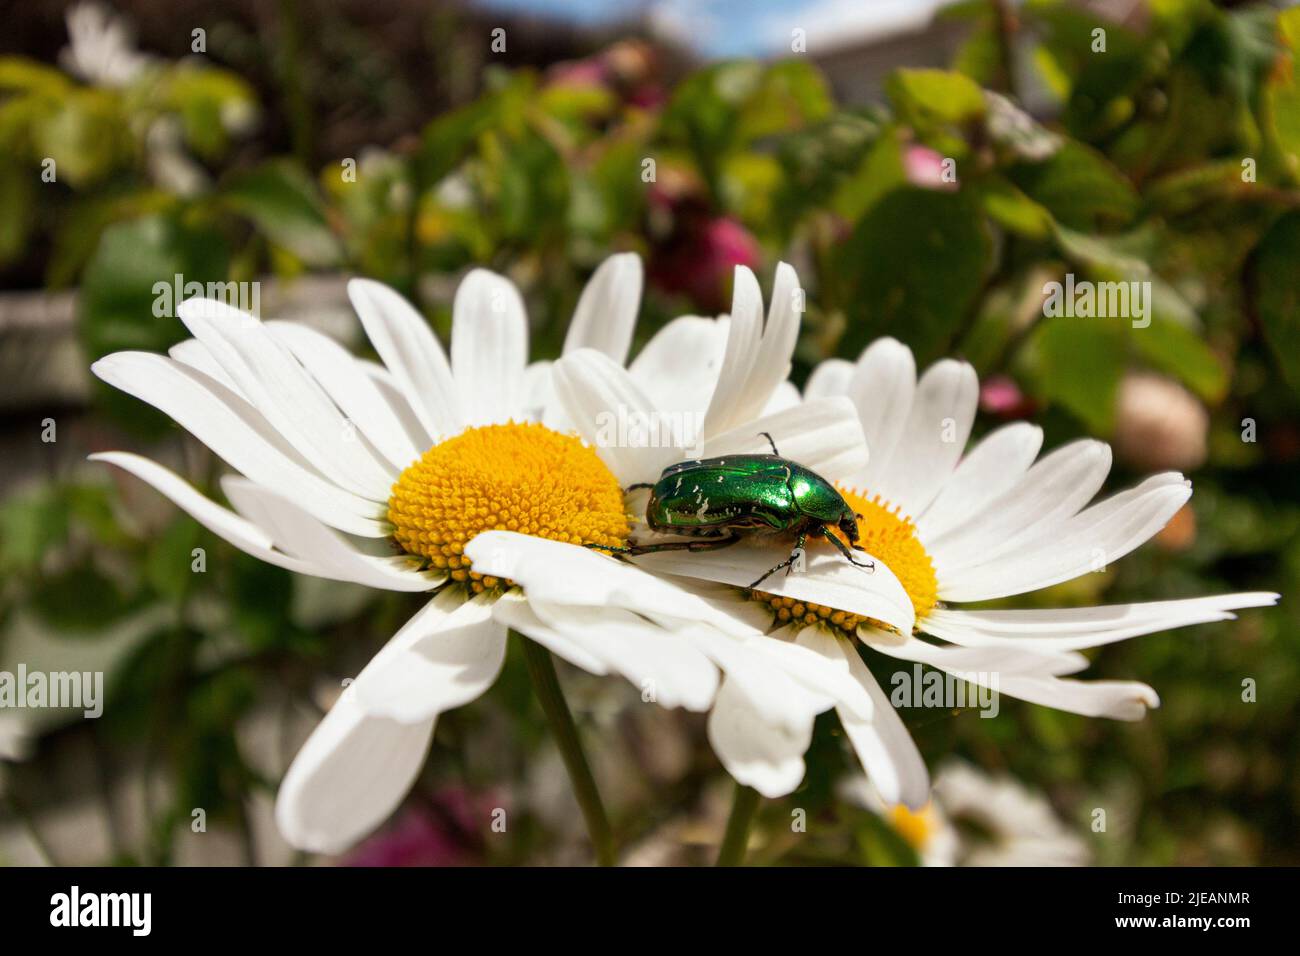 A close up view of a green beetle collecting pollen from a sunflower Stock Photo